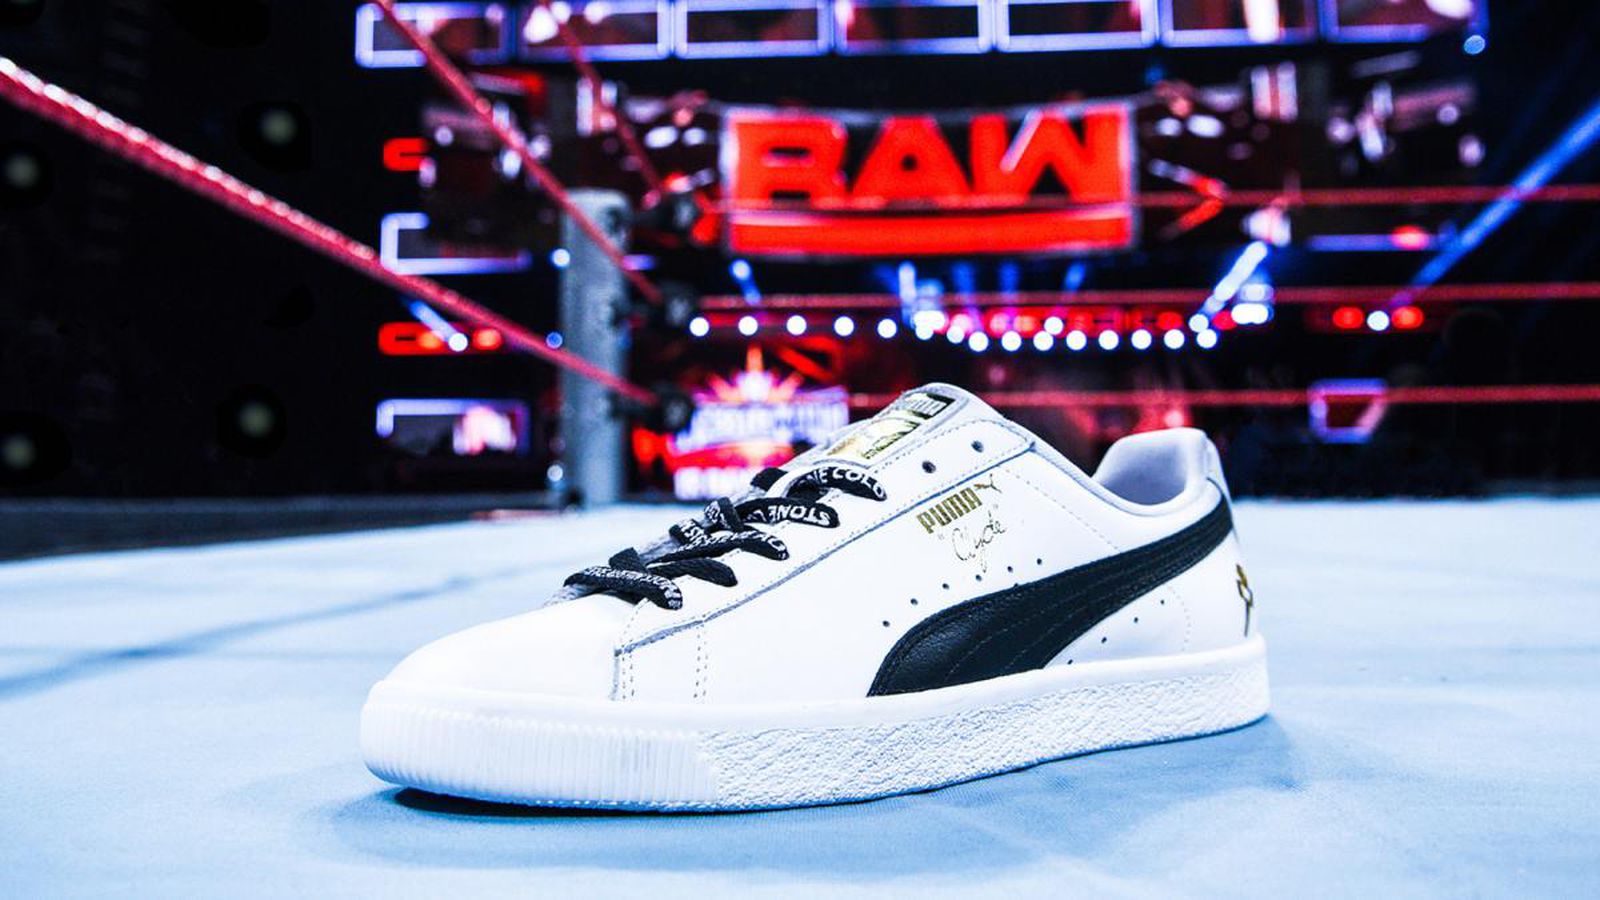 Everything you need to know about Puma & Foot Locker’s